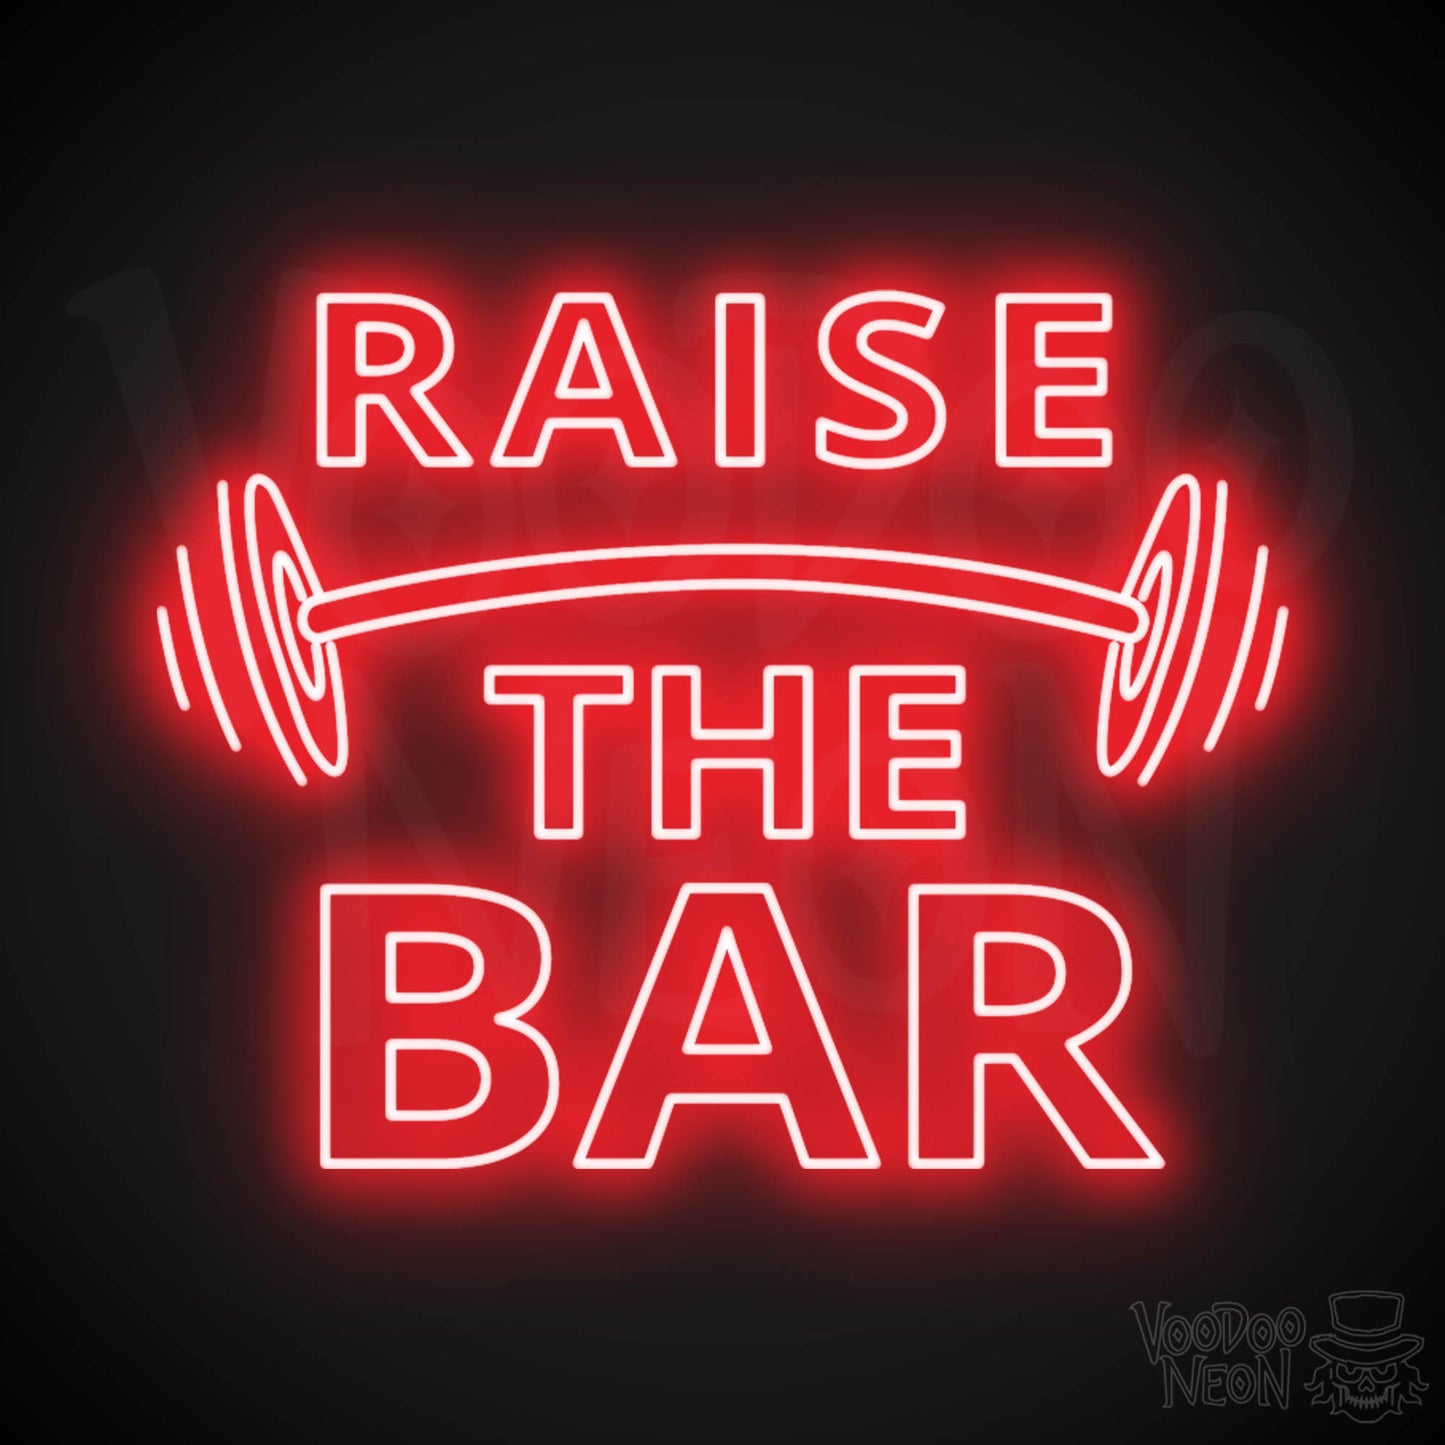 Raise The Bar LED Neon - Red